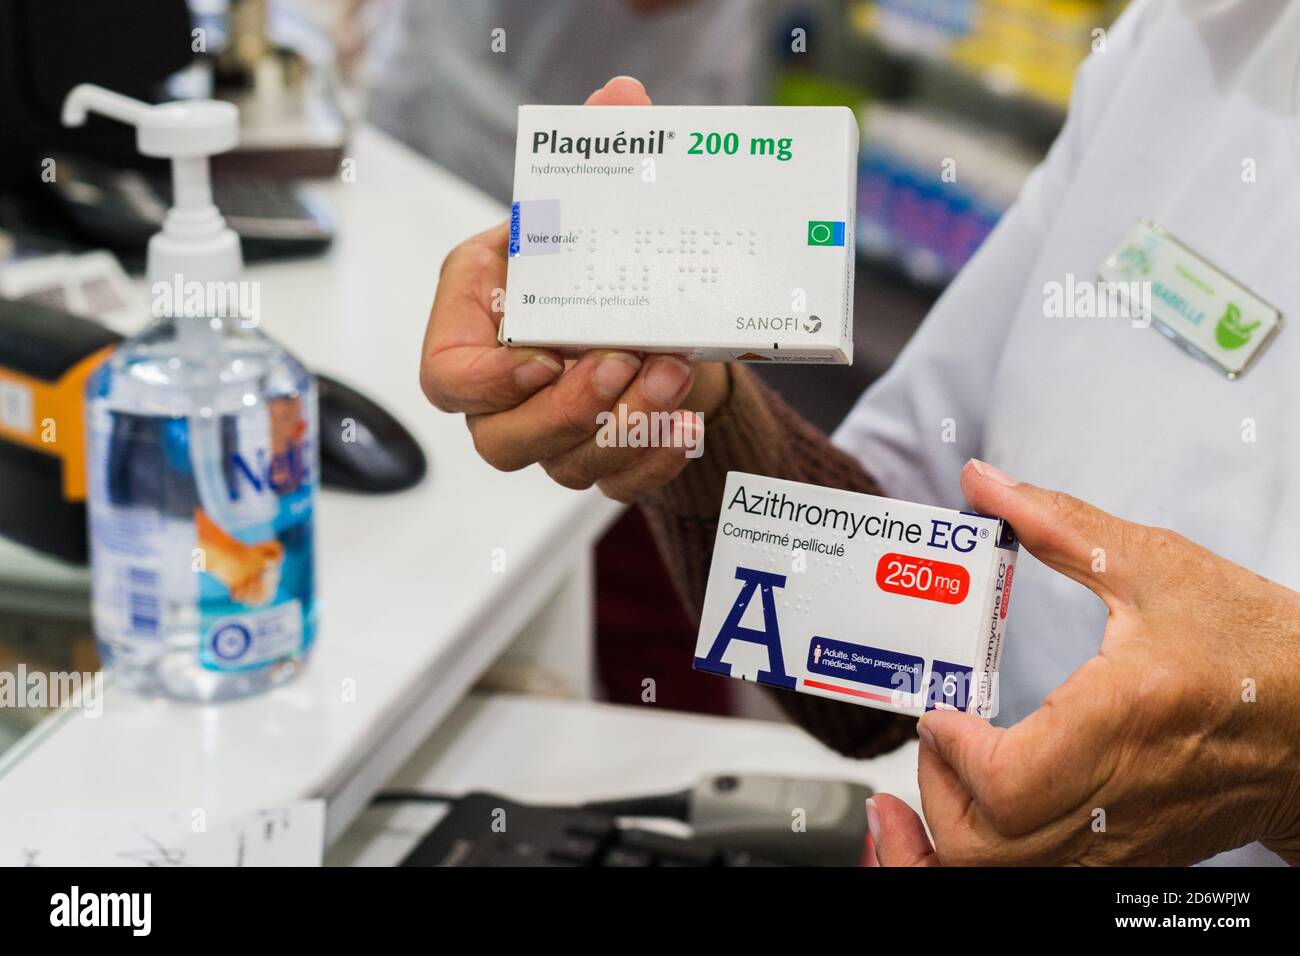 Packet of 250 mg tablets of the antibiotic drug azithromycin and Plaquenil ®, France. Stock Photo